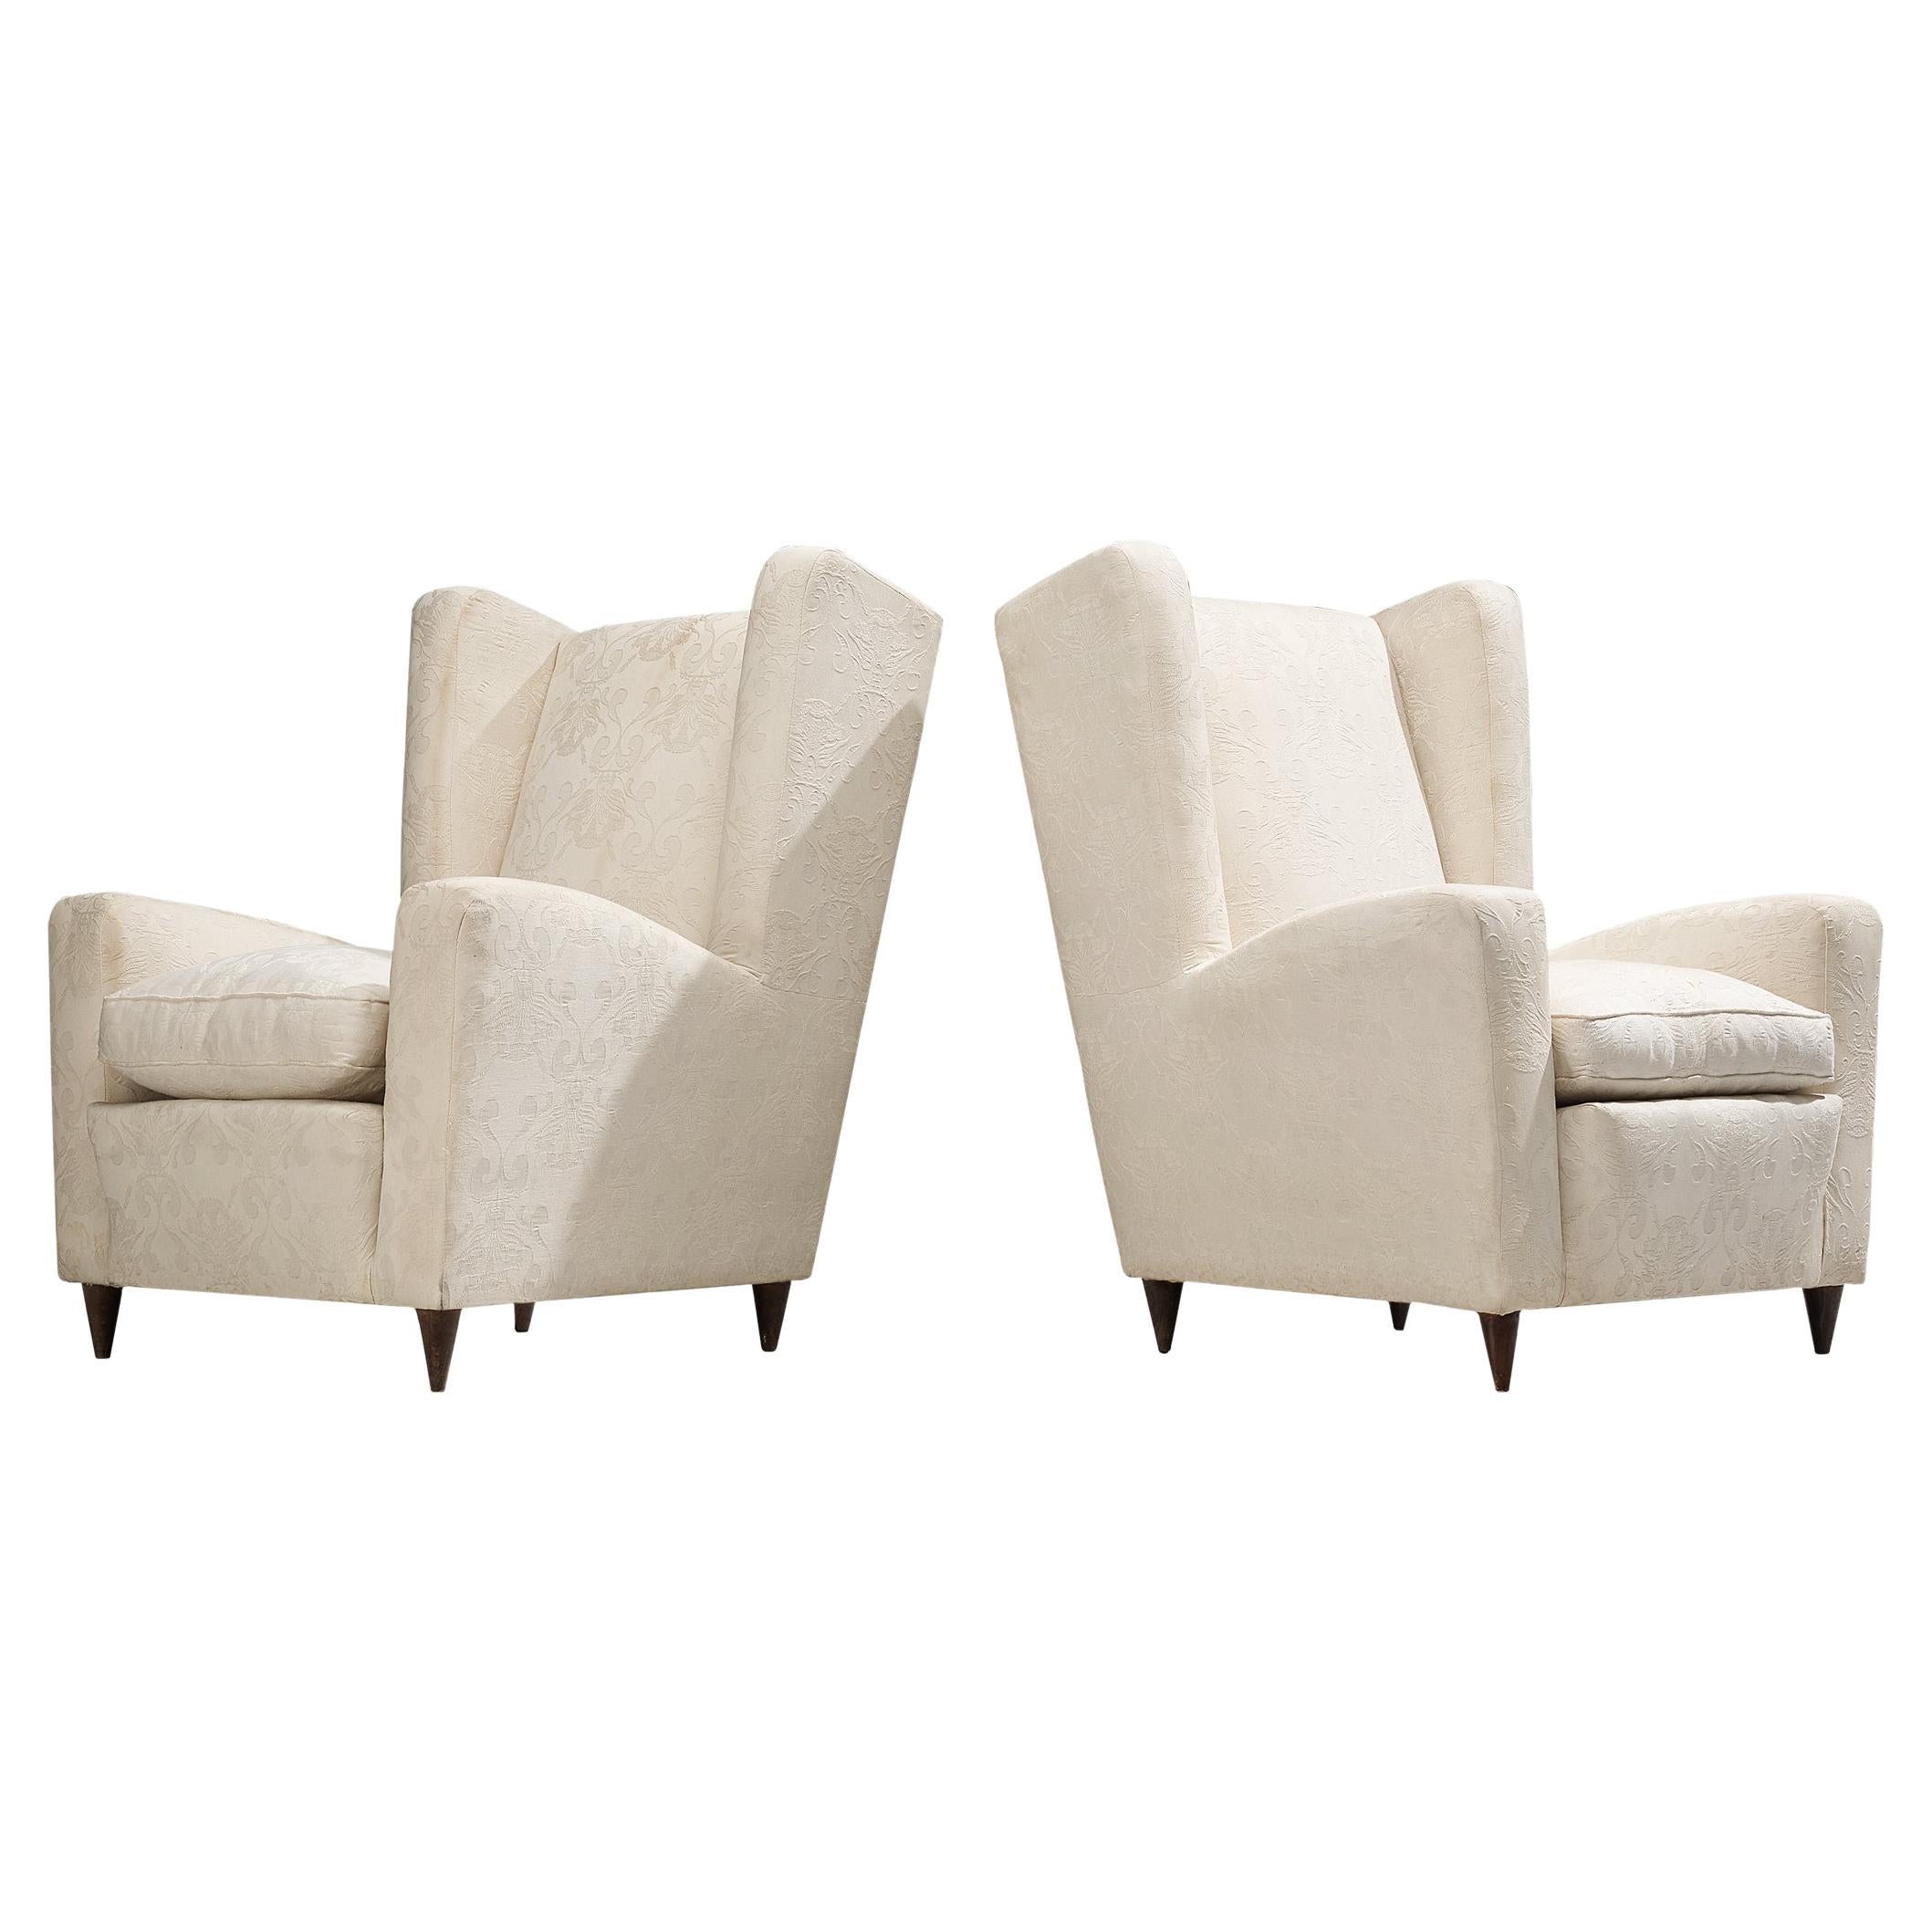 Italian Pair of Wingback Chairs in Off-White Upholstery For Sale